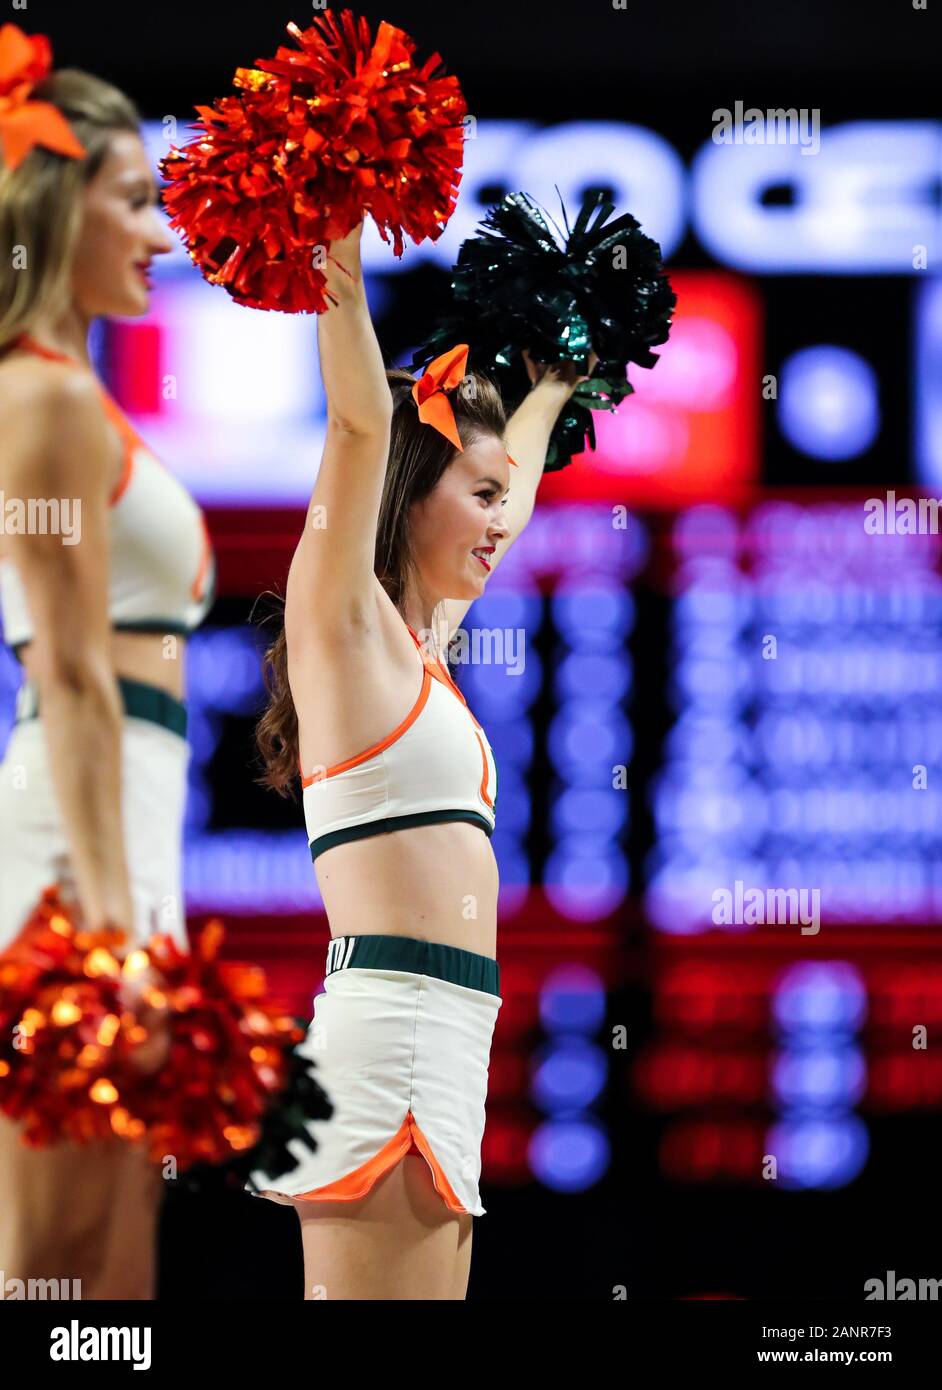 January 18, 2020: Miami Hurricanes cheerleaders perform during an NCAA men's basketball game against the Florida State Seminoles at the Watsco Center in Coral Gables, Florida. Florida State won 83-79 in overtime. Mario Houben/CSM Stock Photo